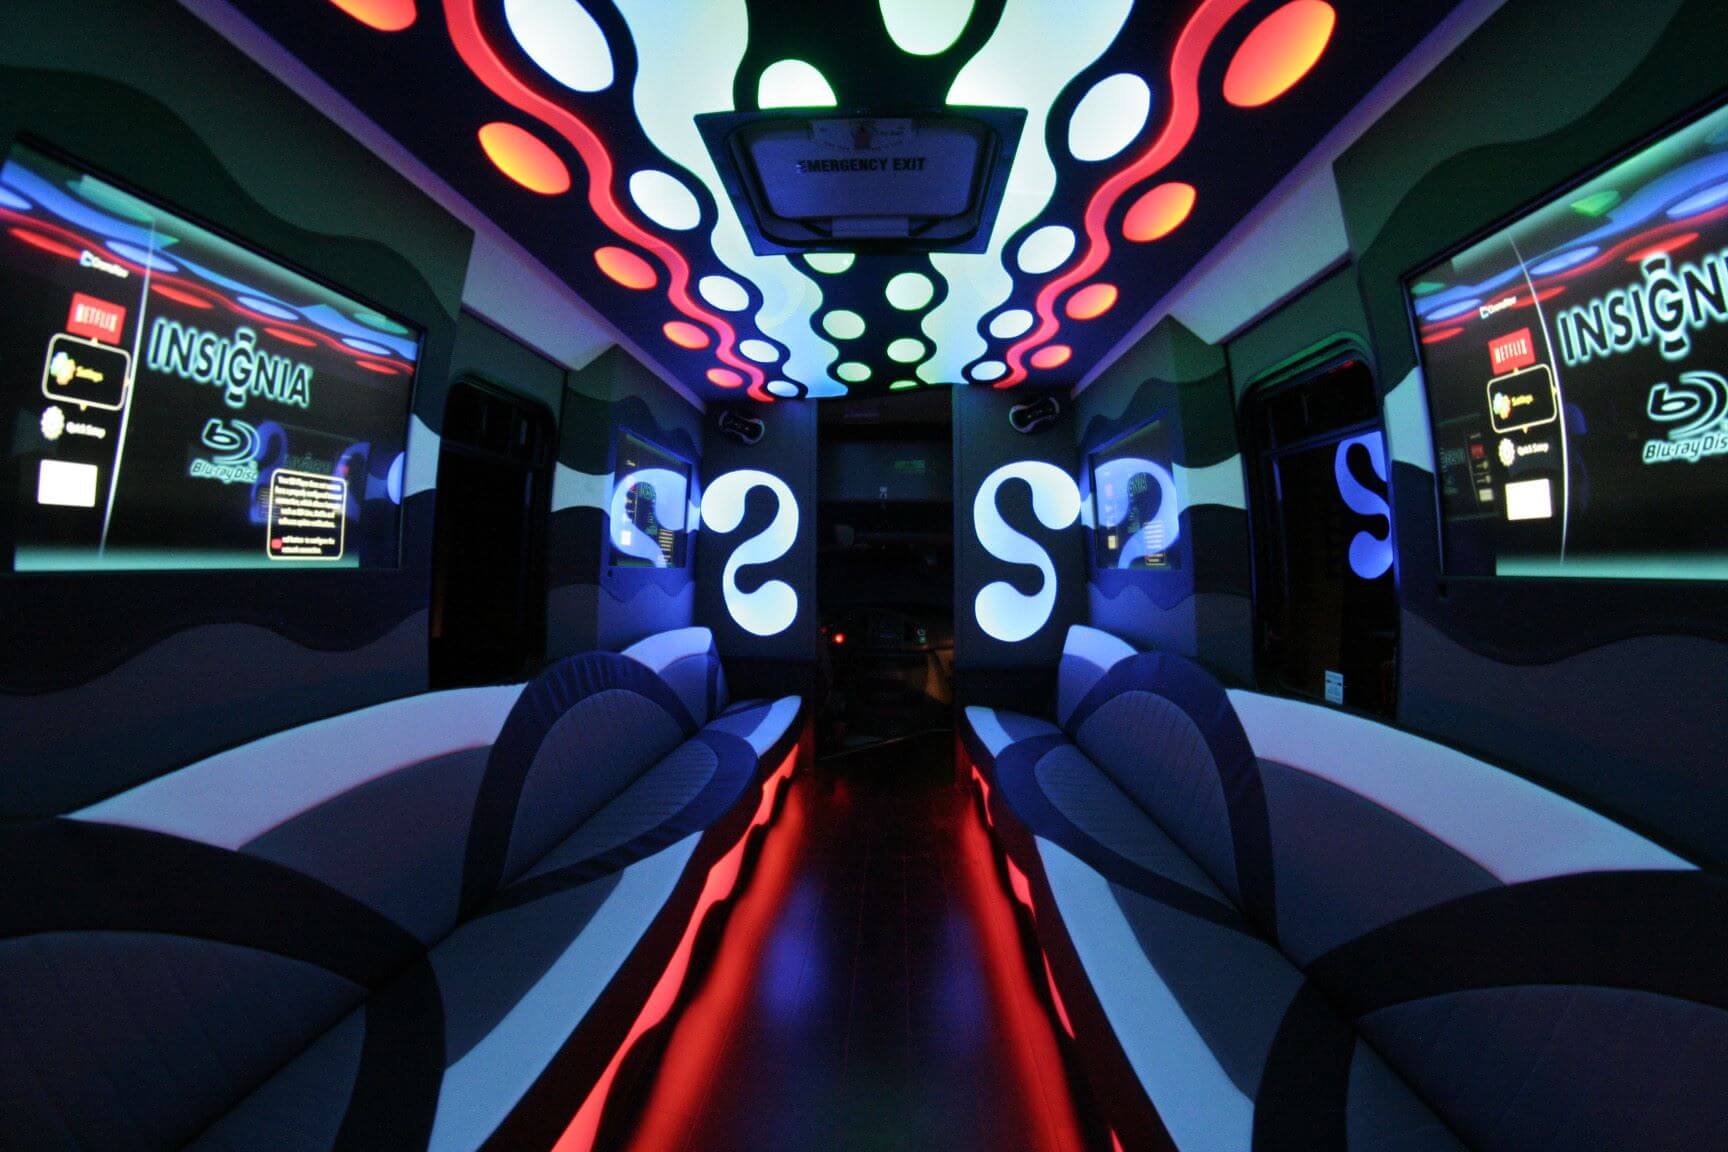 Party bus rentals with LEd lighting